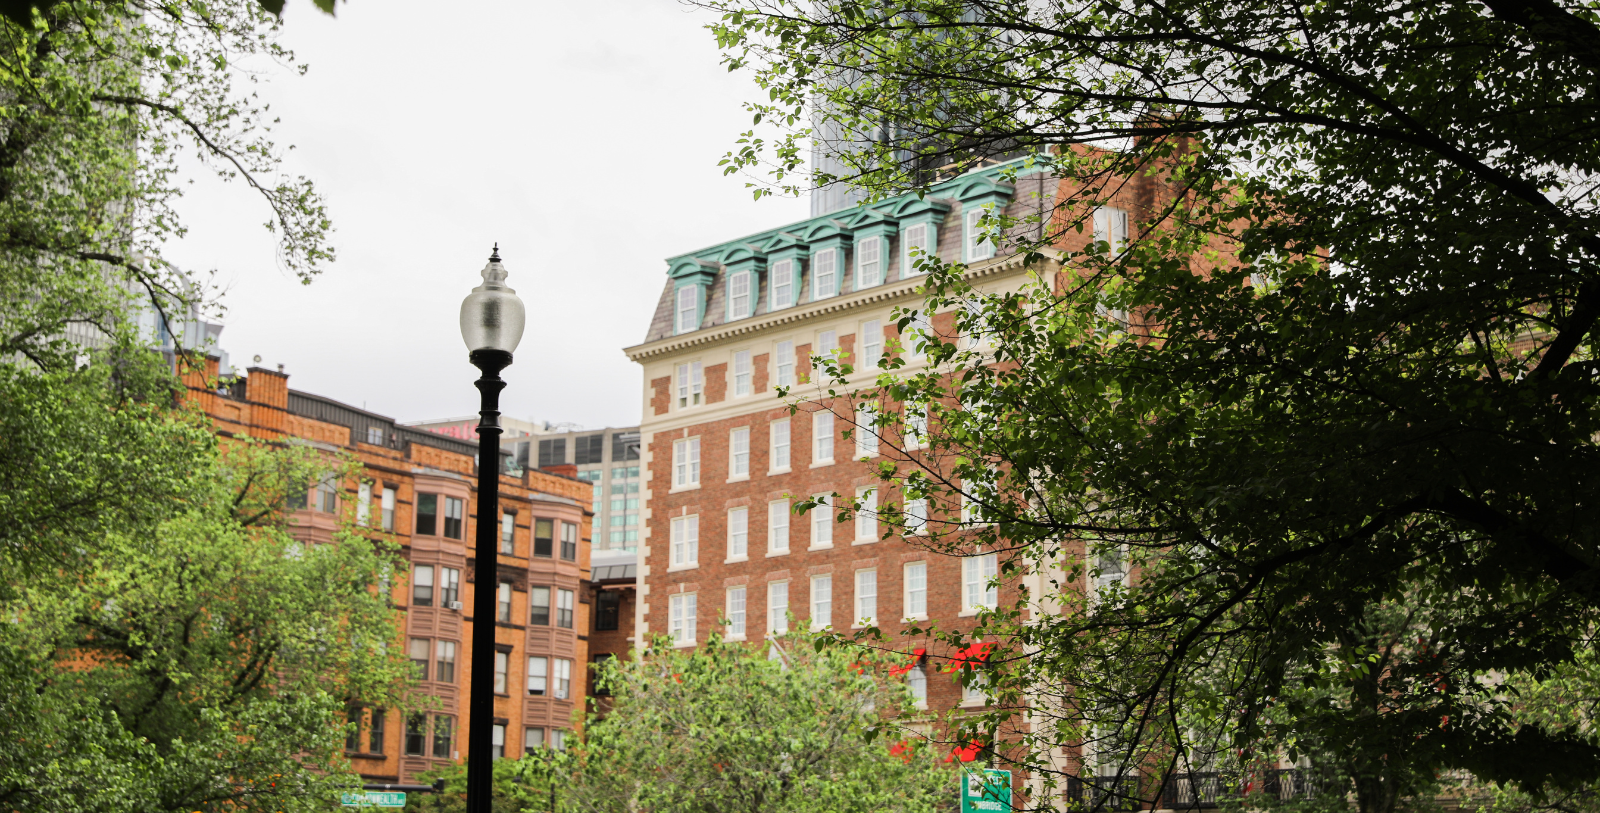 Relax in the Parisian-inspired boulevards and parks of the Back Bay, a convenient gateway for a greater view of Boston.